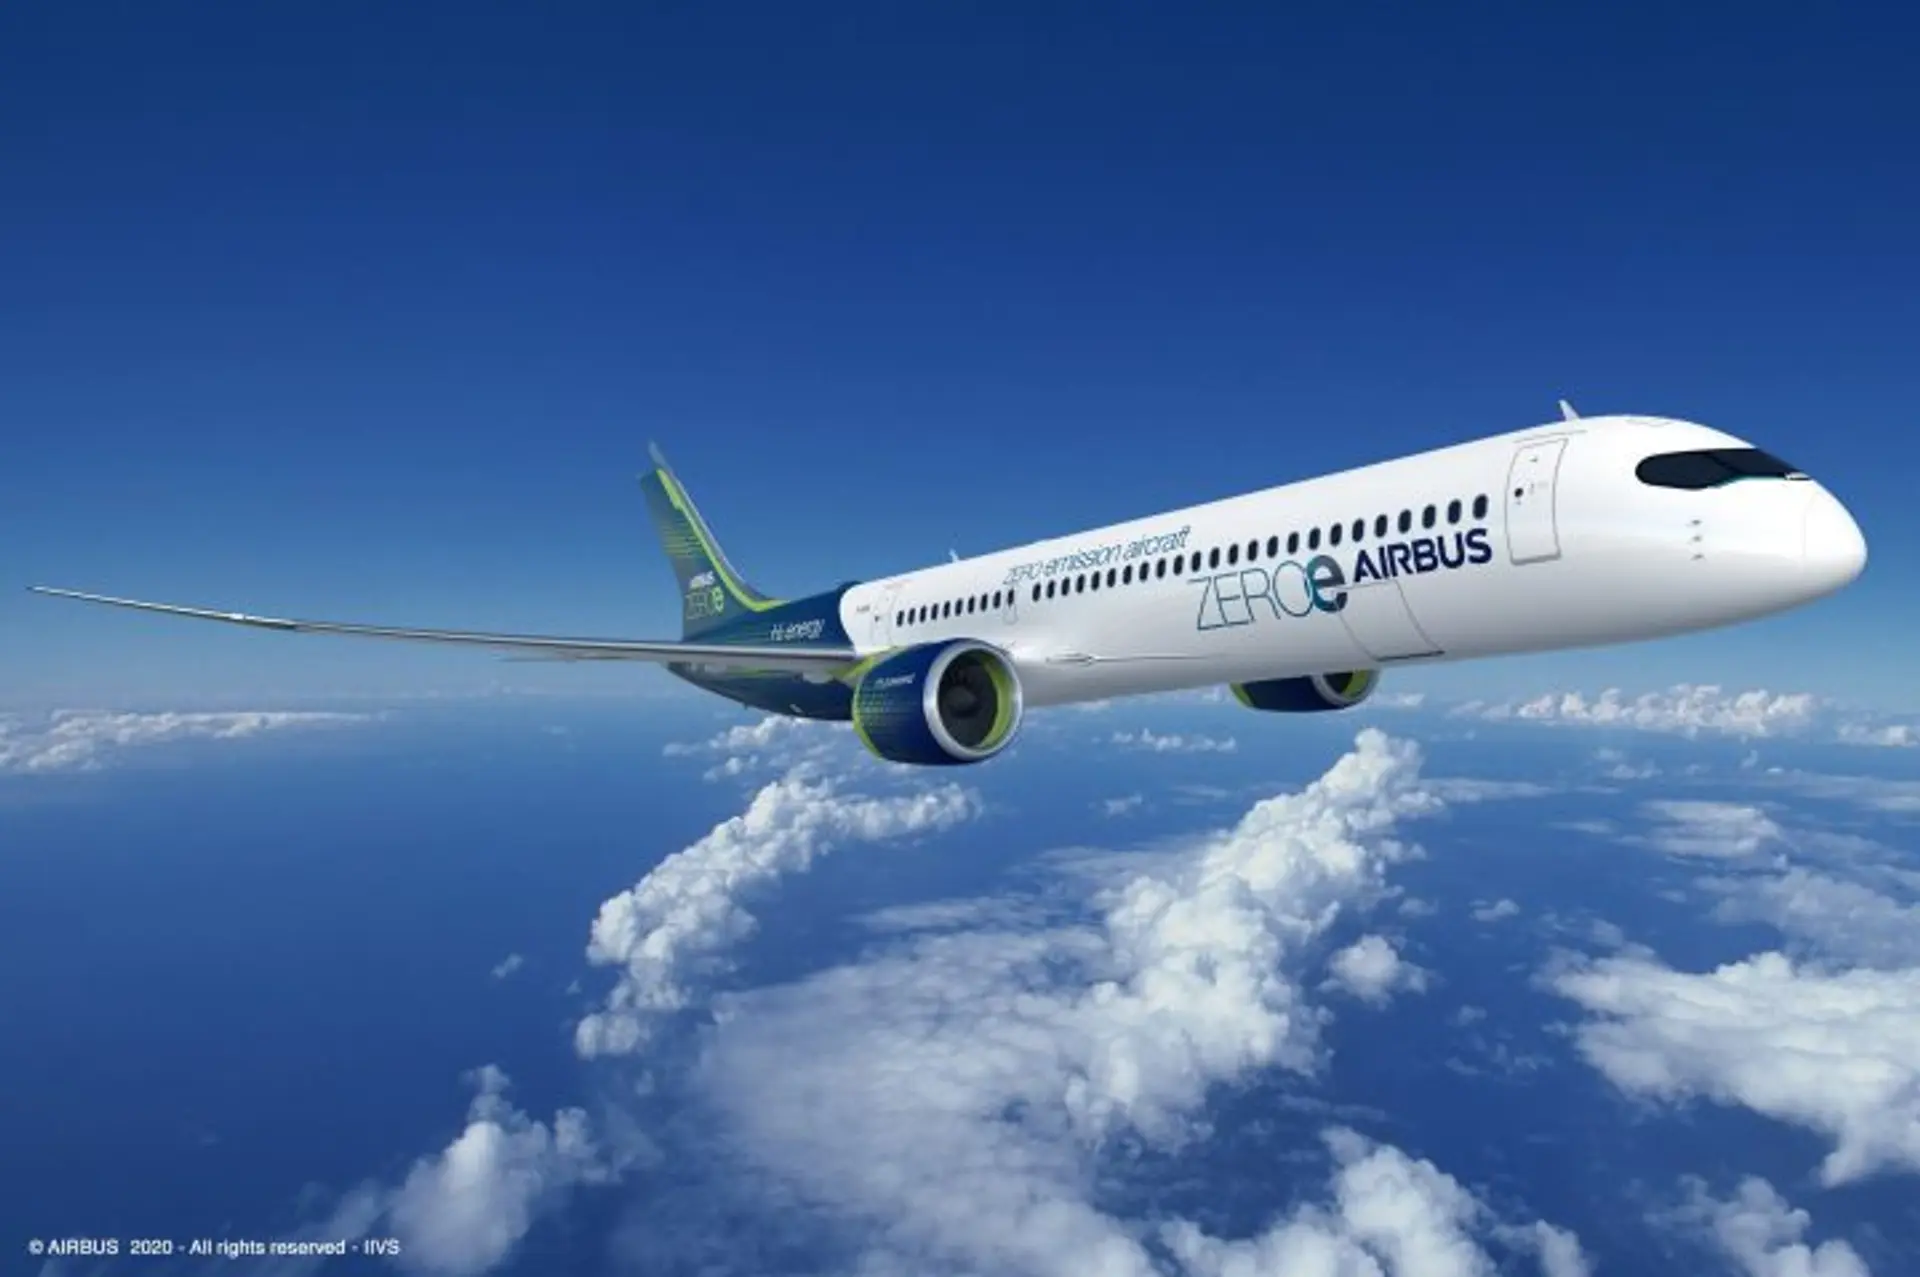 Airlines News - Boeing Announces Its Plans For A Sustainable Future